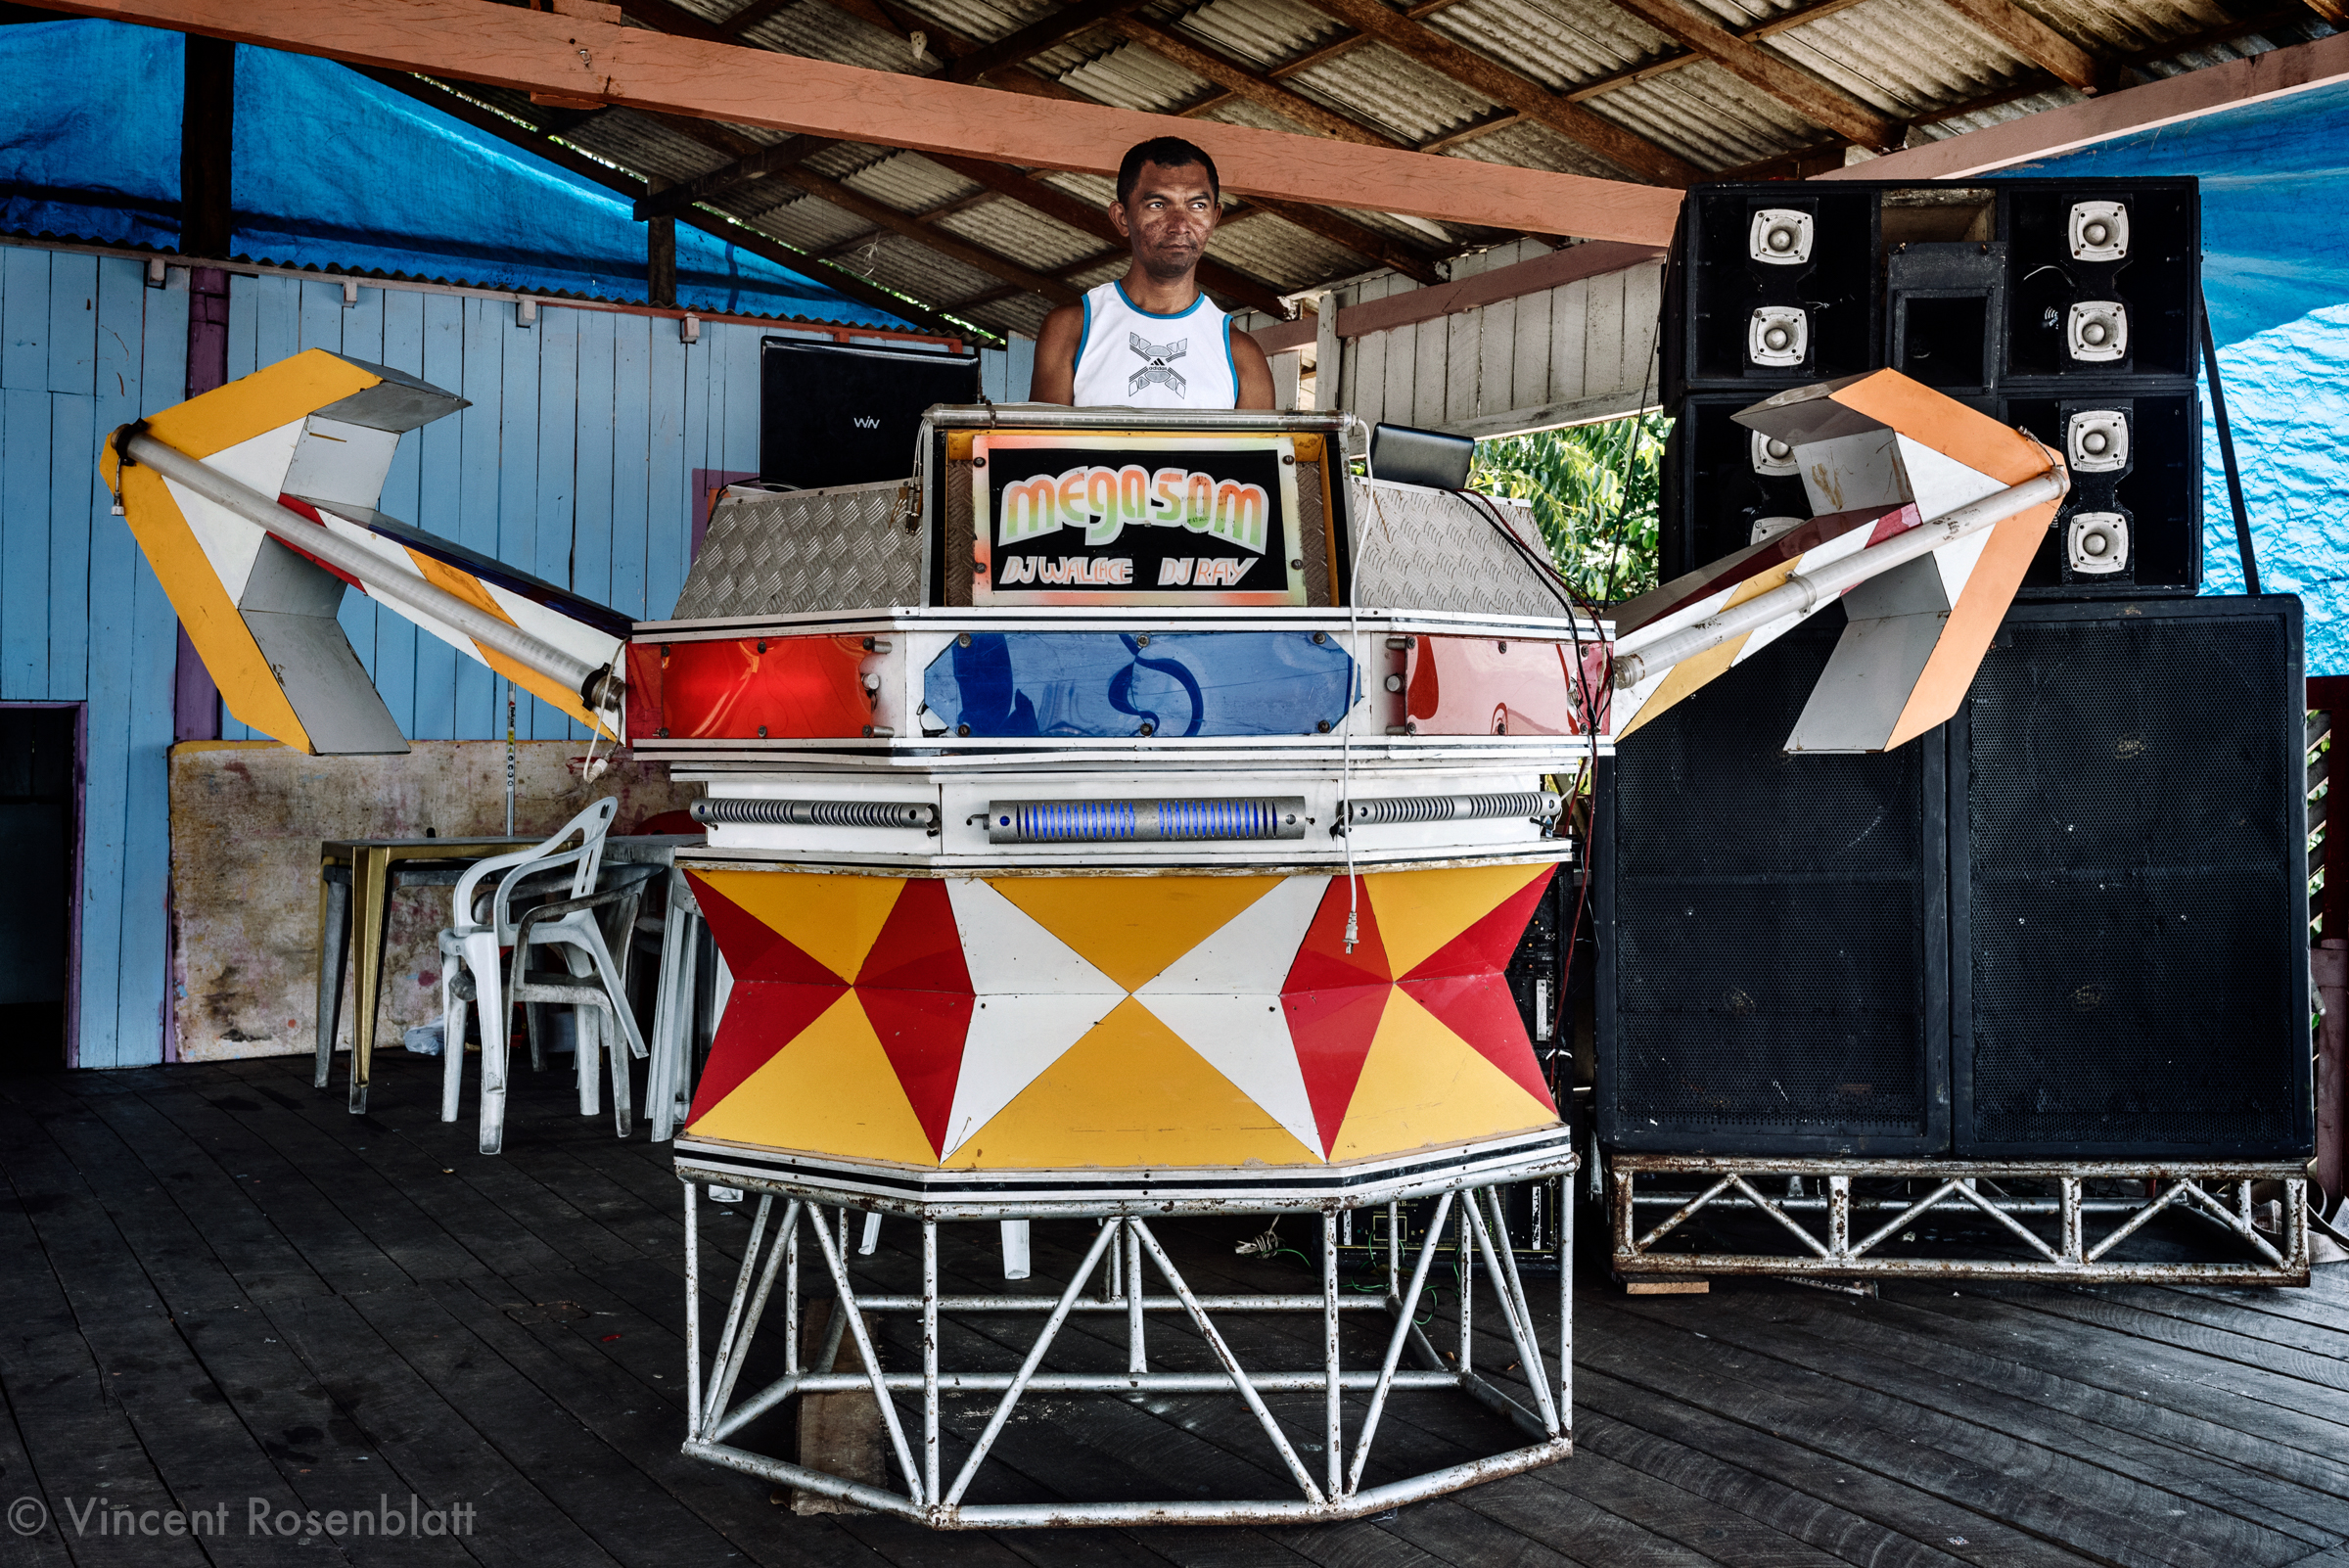  Mega Som (Mega Sound) is a small sized "aparelhagem" with an "indian arrows" inspiration design... Small soundsystems populate by hundreds the rivers shores bars in the state of Pará. 
DJ Kleber is already mixing even if the public did not arrive ye